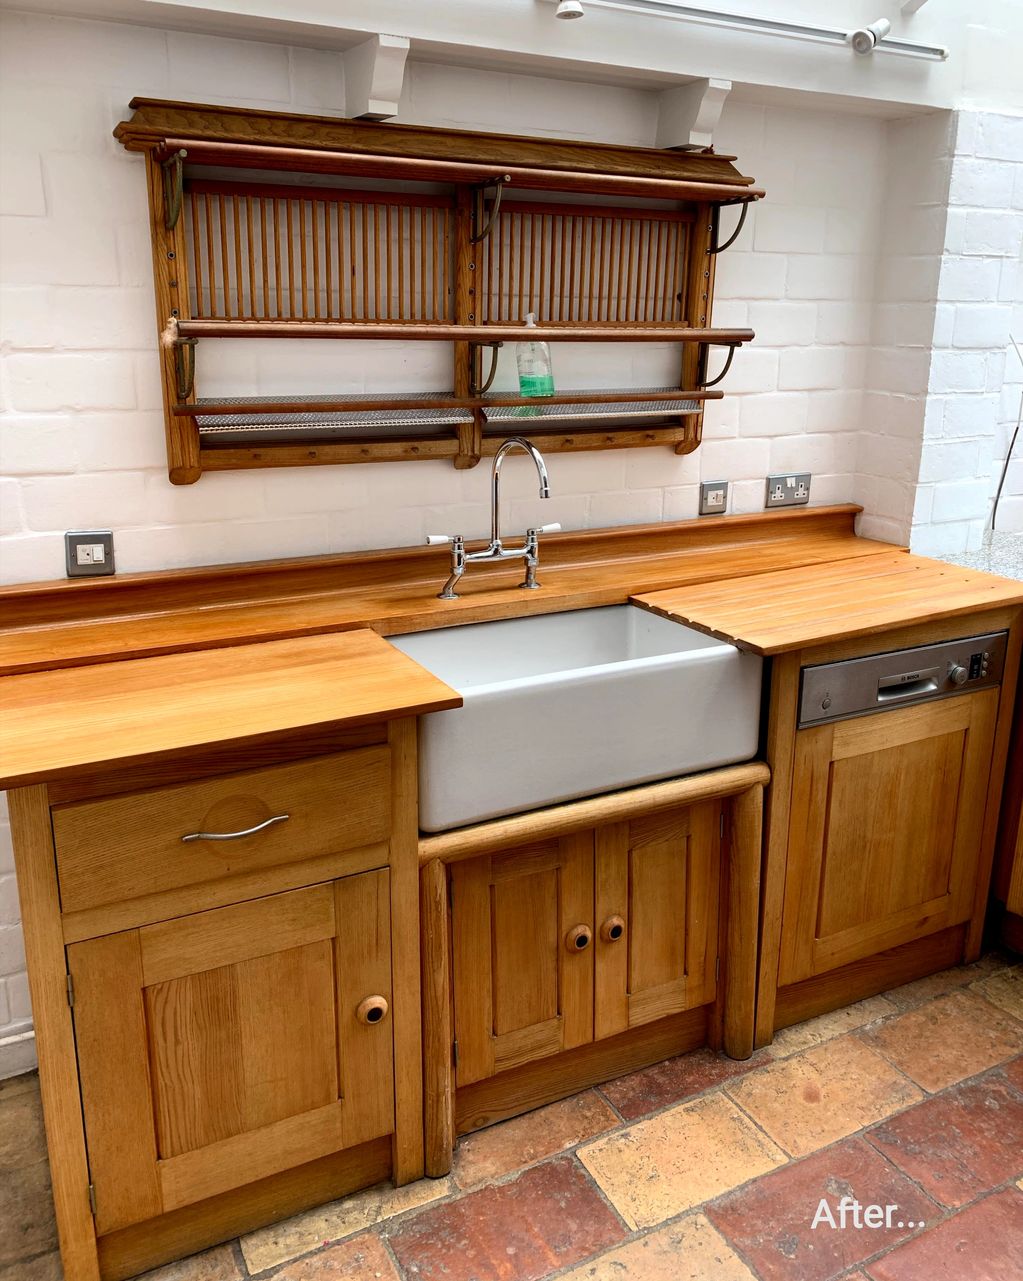 Oak kitchen Unit & Mahogany Worktop stripped cleaned and oiled